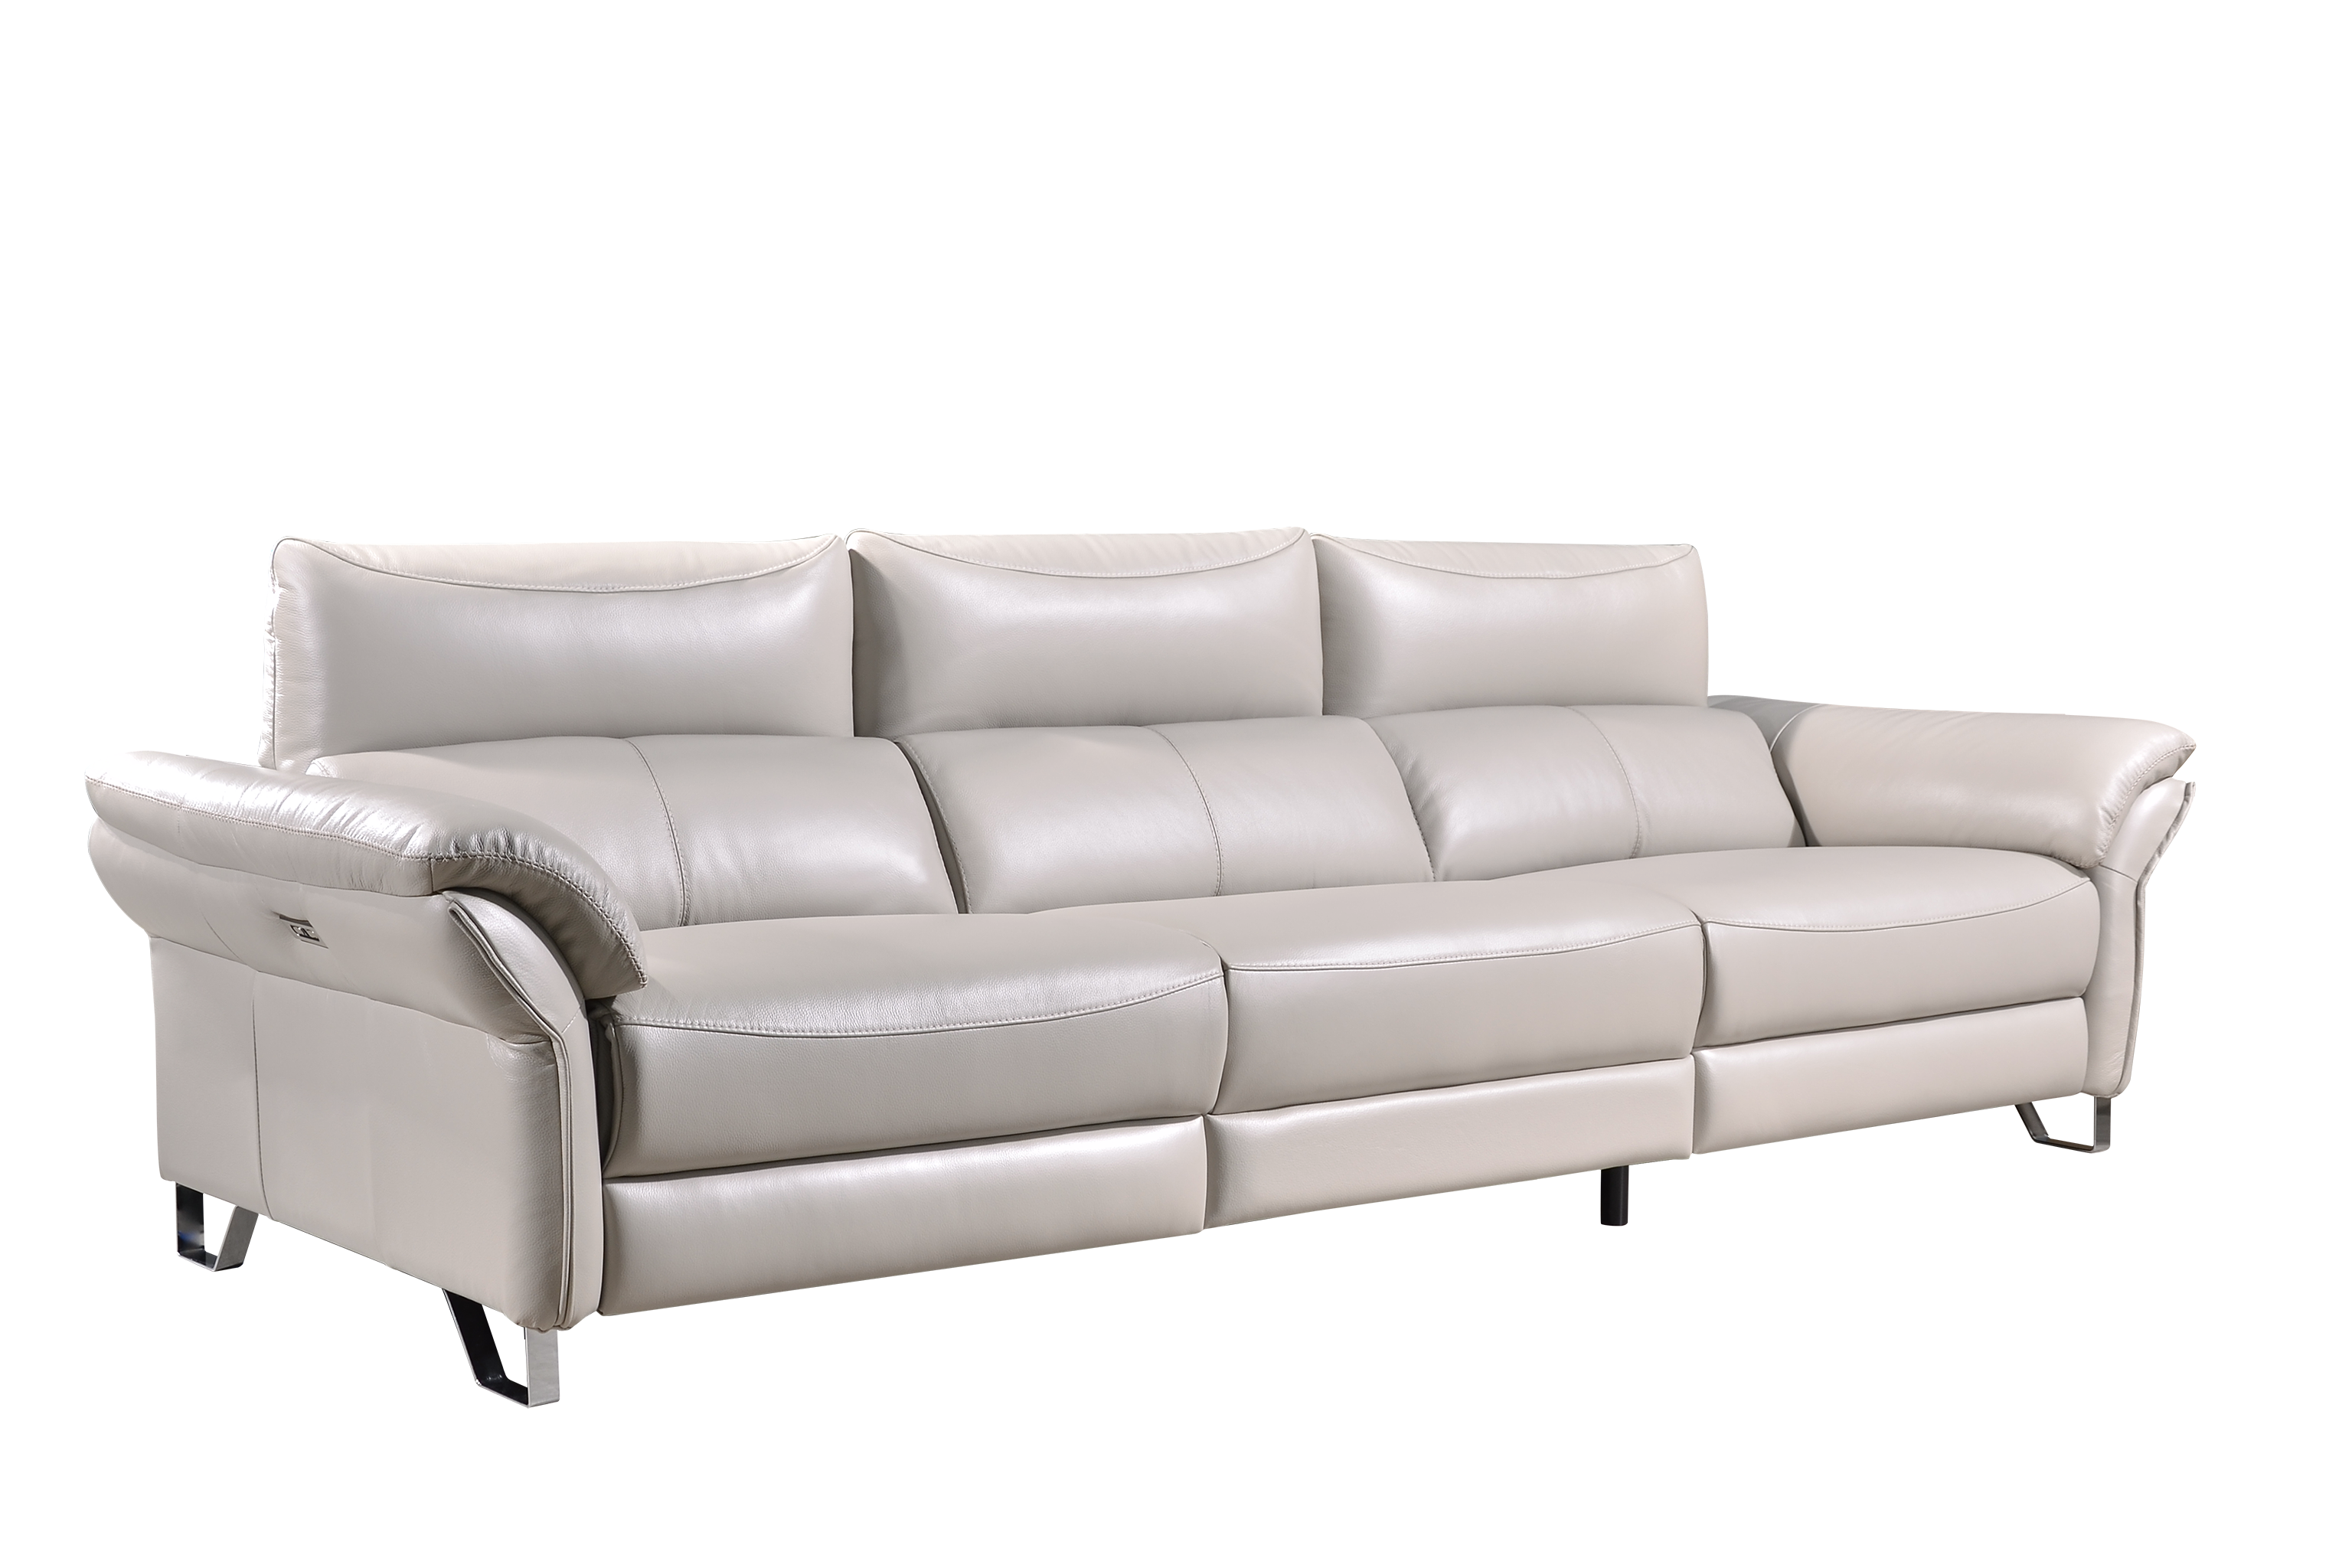 TOMAS 3.5 Seater Recliner Sofa in Leather by Castilla